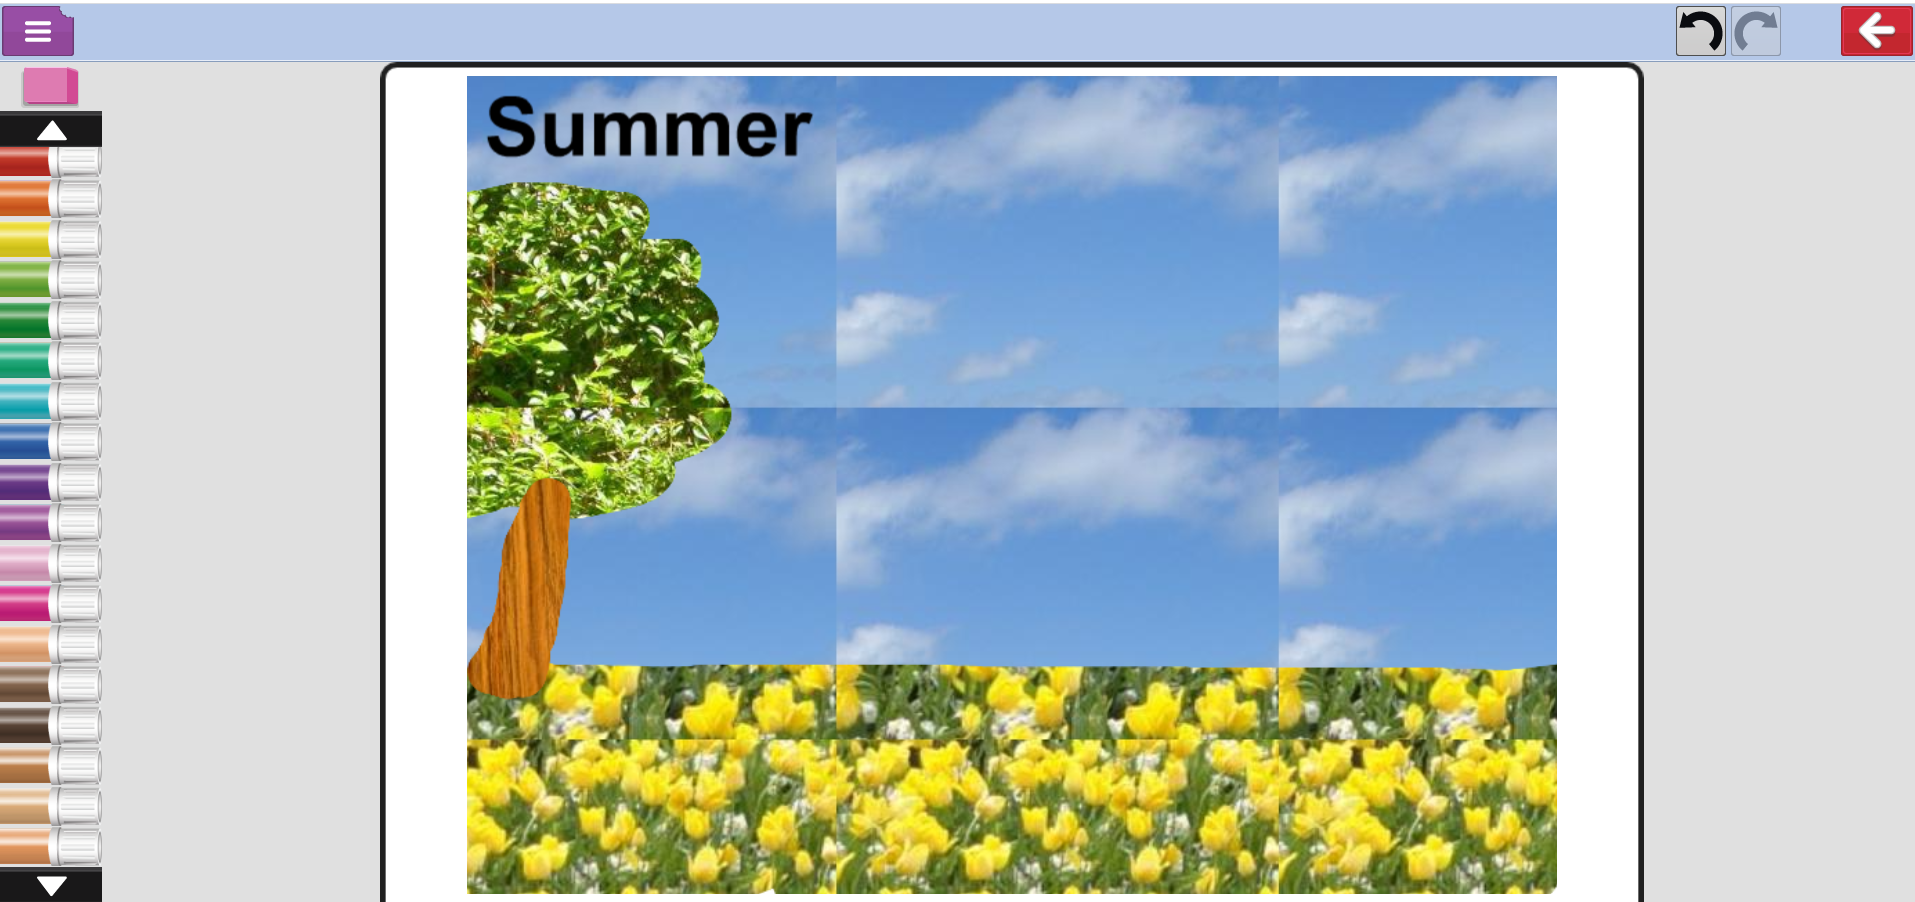 Summer - Book of Hope.PNG